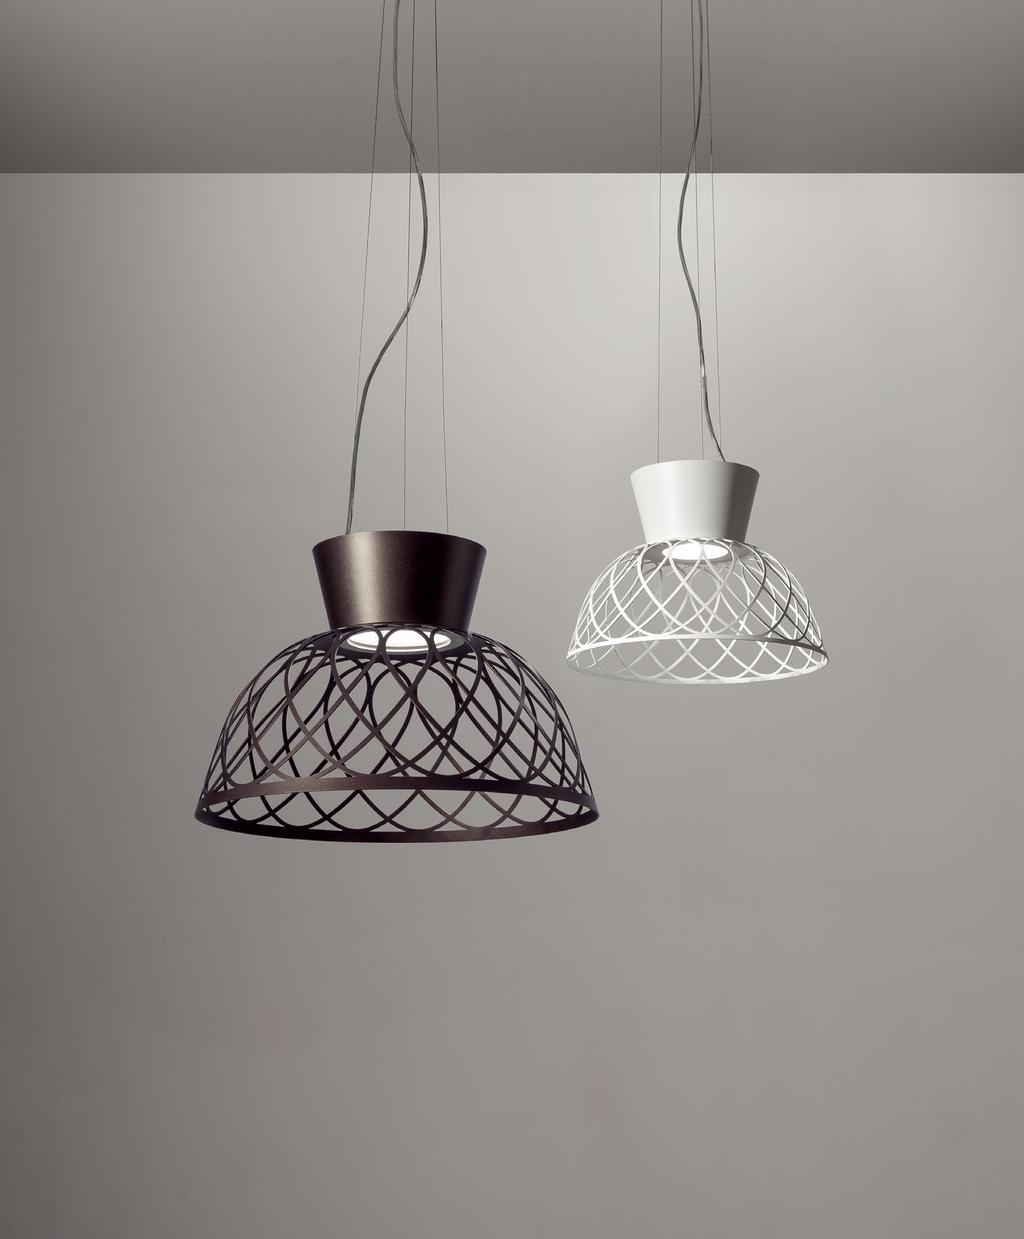 4 / 5 itama / collection collection [En] > Braidings of light. is a suspension lamp characterised by a metal dome enriched by a complex laser cutted ornament.